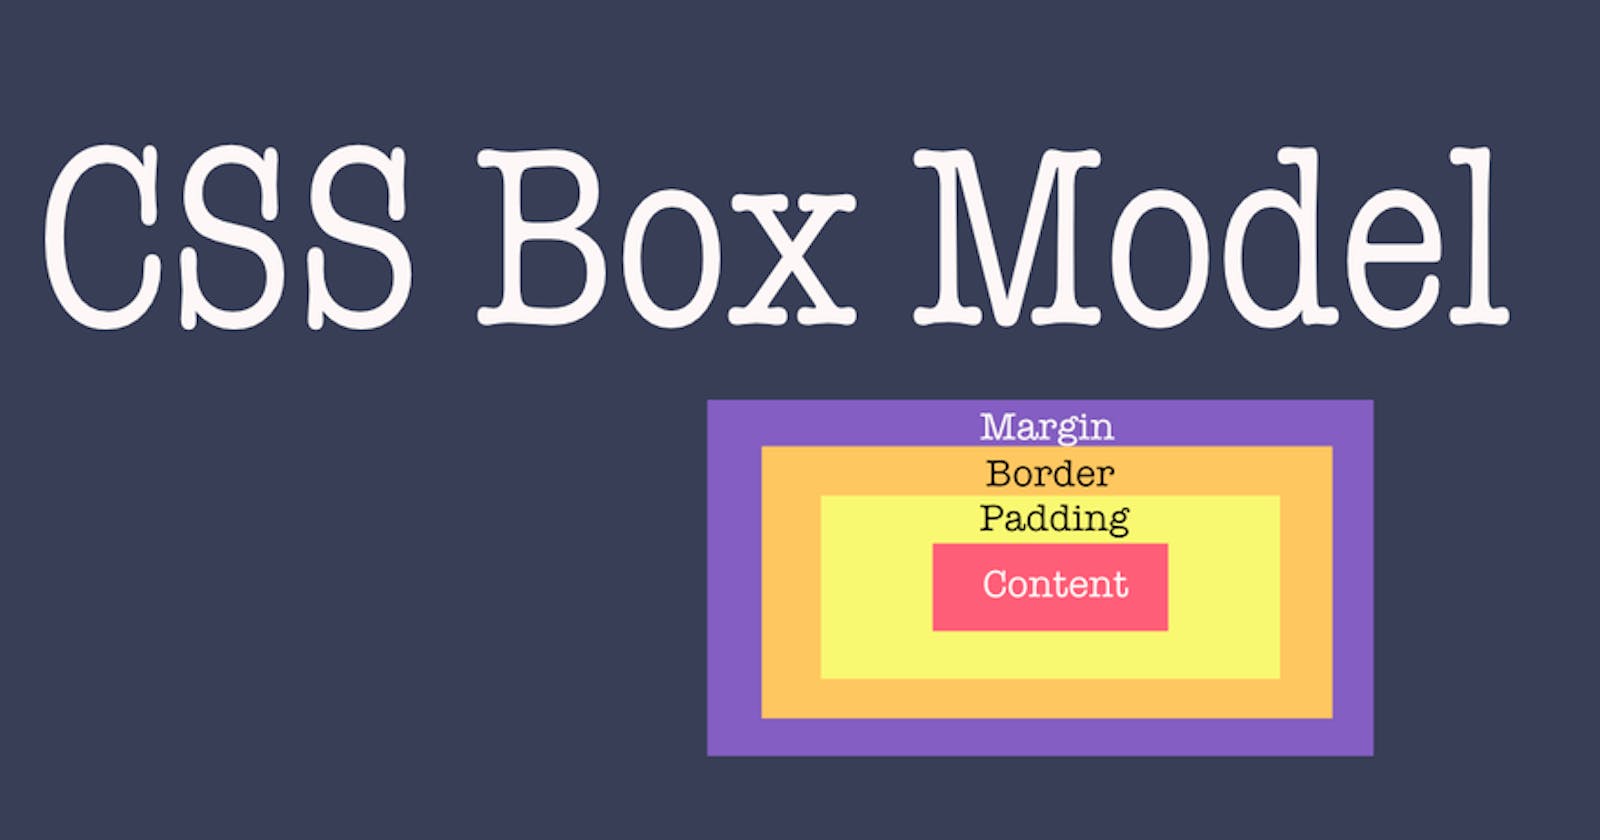 Css Box Model - Exaplained